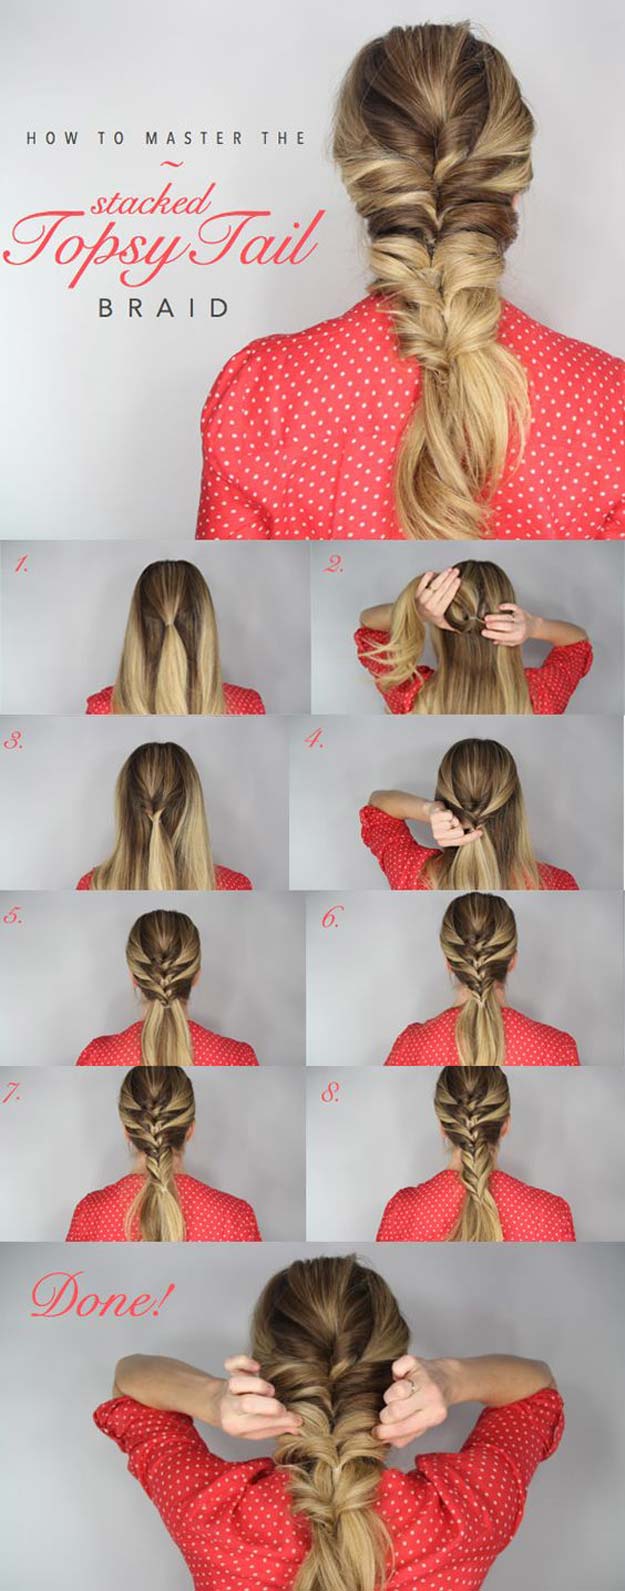 Best Hair Braiding Tutorials - Topsy Tail Braid - Easy Step by Step Tutorials for Braids - How To Braid Fishtail, French Braids, Flower Crown, Side Braids, Cornrows, Updos - Cool Braided Hairstyles for Girls, Teens and Women - School, Day and Evening, Boho, Casual and Formal Looks #hairstyles #braiding #braidingtutorials #diyhair 